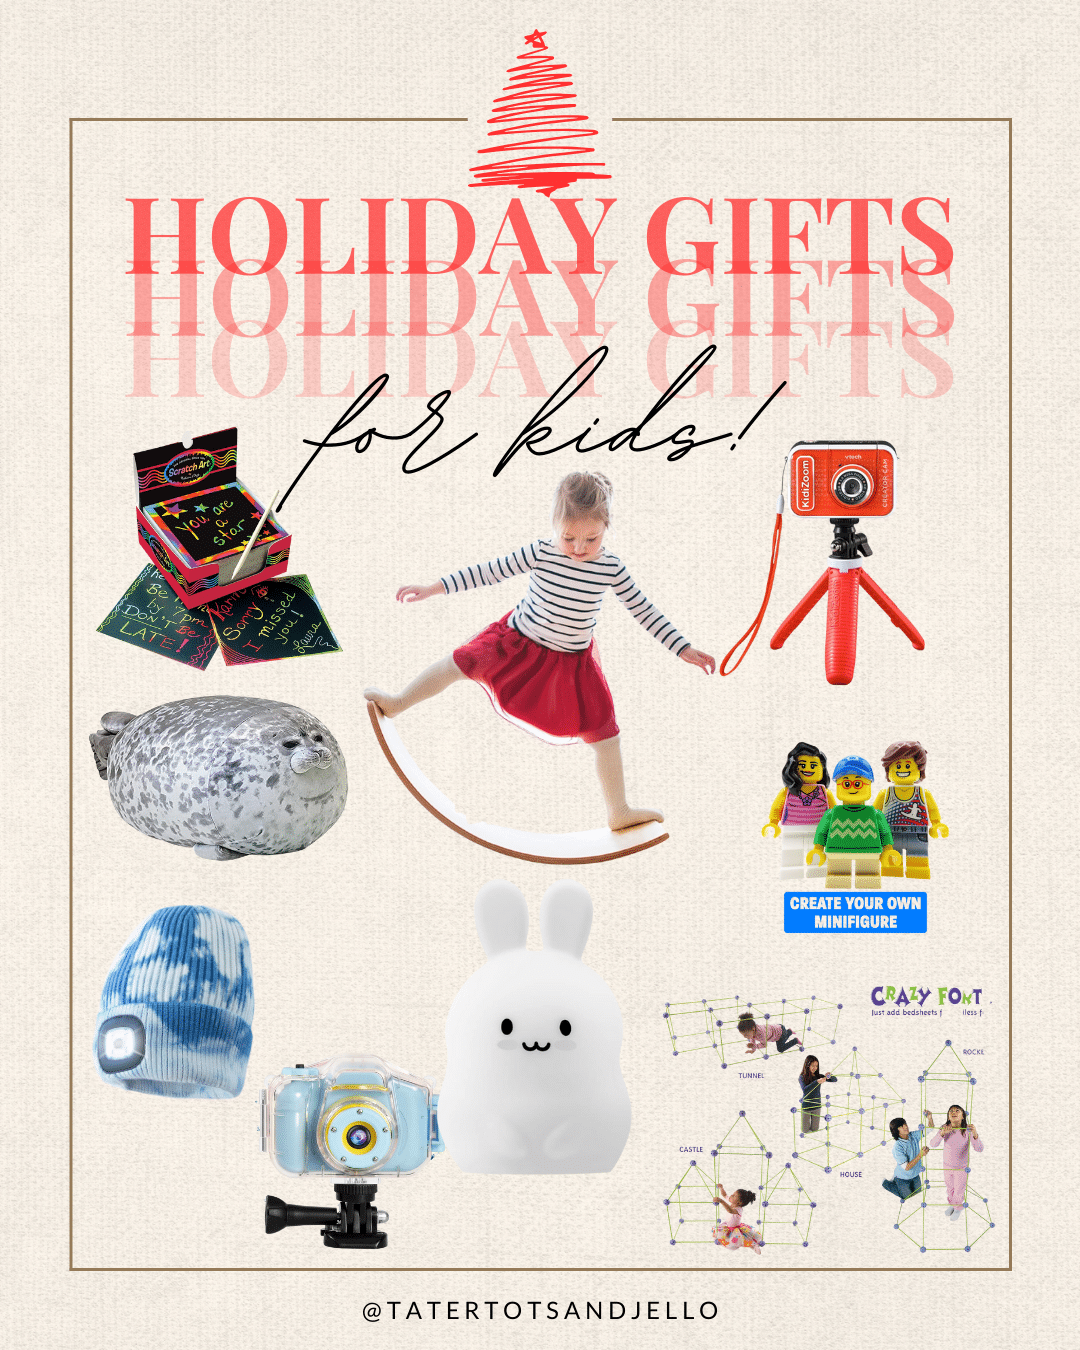 The Ultimate Kids Holiday Gift Guide! Discover the joy of hassle-free holiday shopping with our Ultimate Kids Holiday Gift Guide - delightful and creative gifts kids will love!